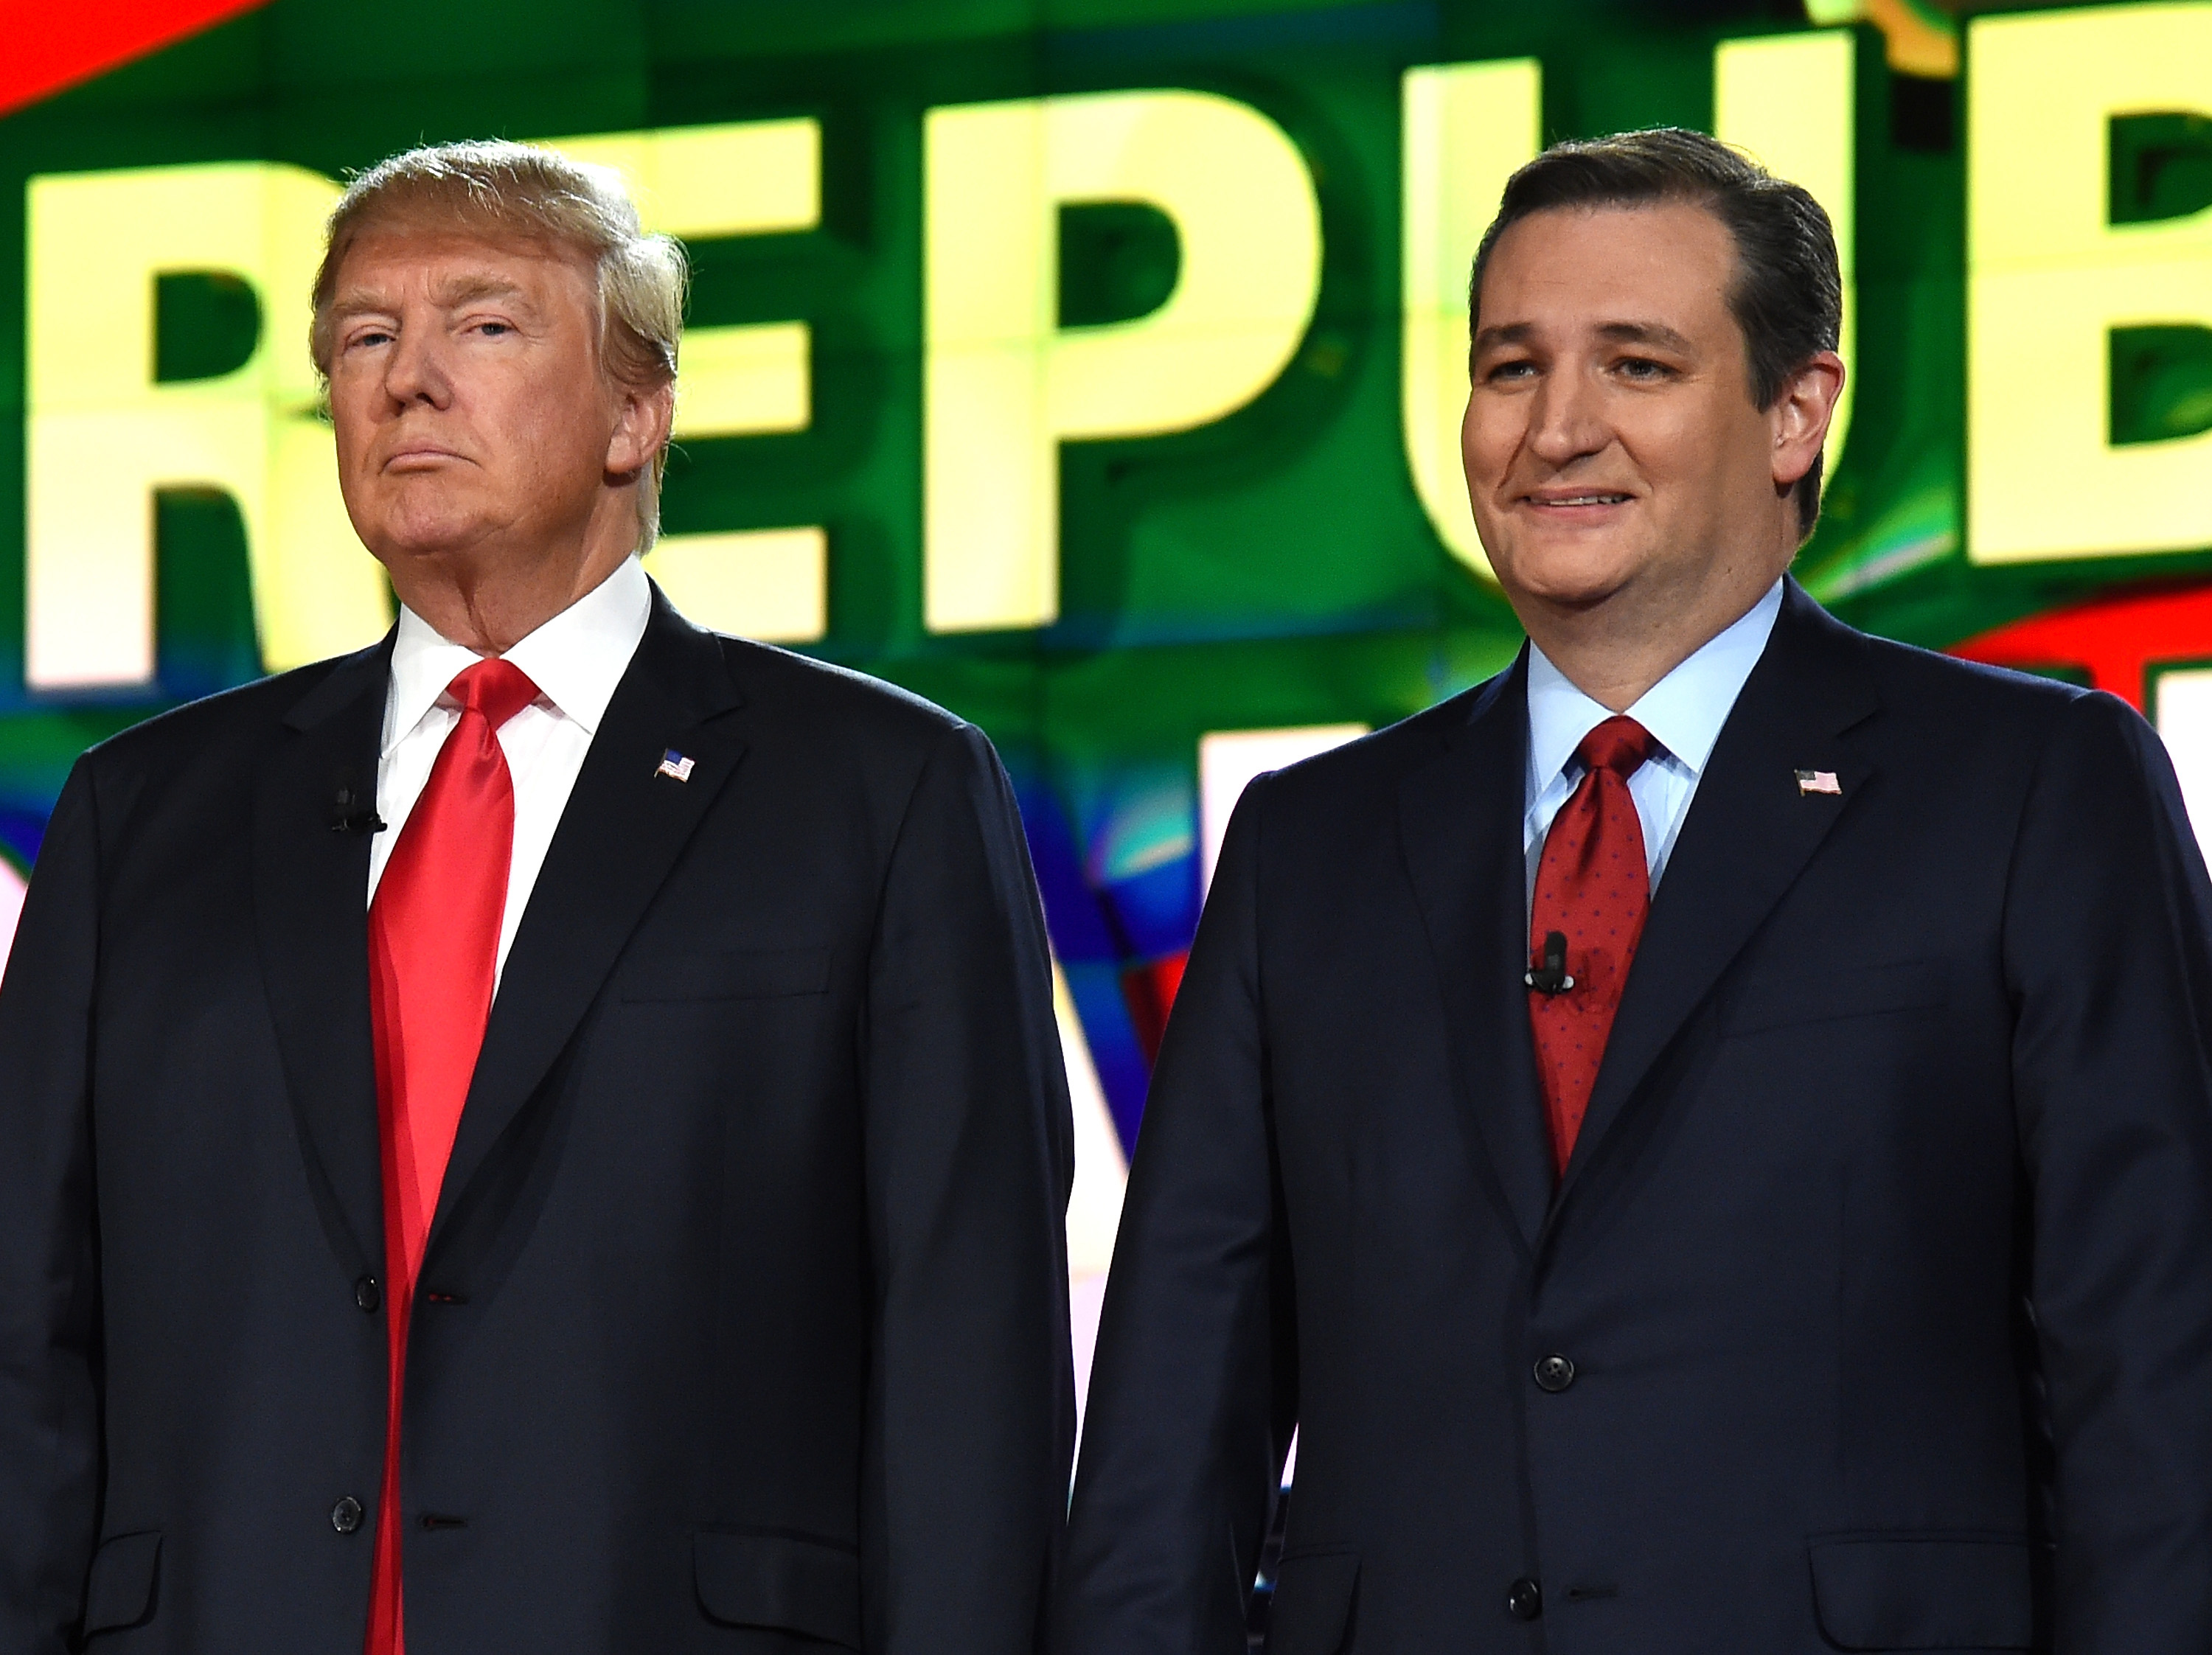 Donald Trump and Ted Cruz during the CNN presidential debate at The Venetian Las Vegas on Dec. 15, 2015. (Ethan Miller—Getty Images)